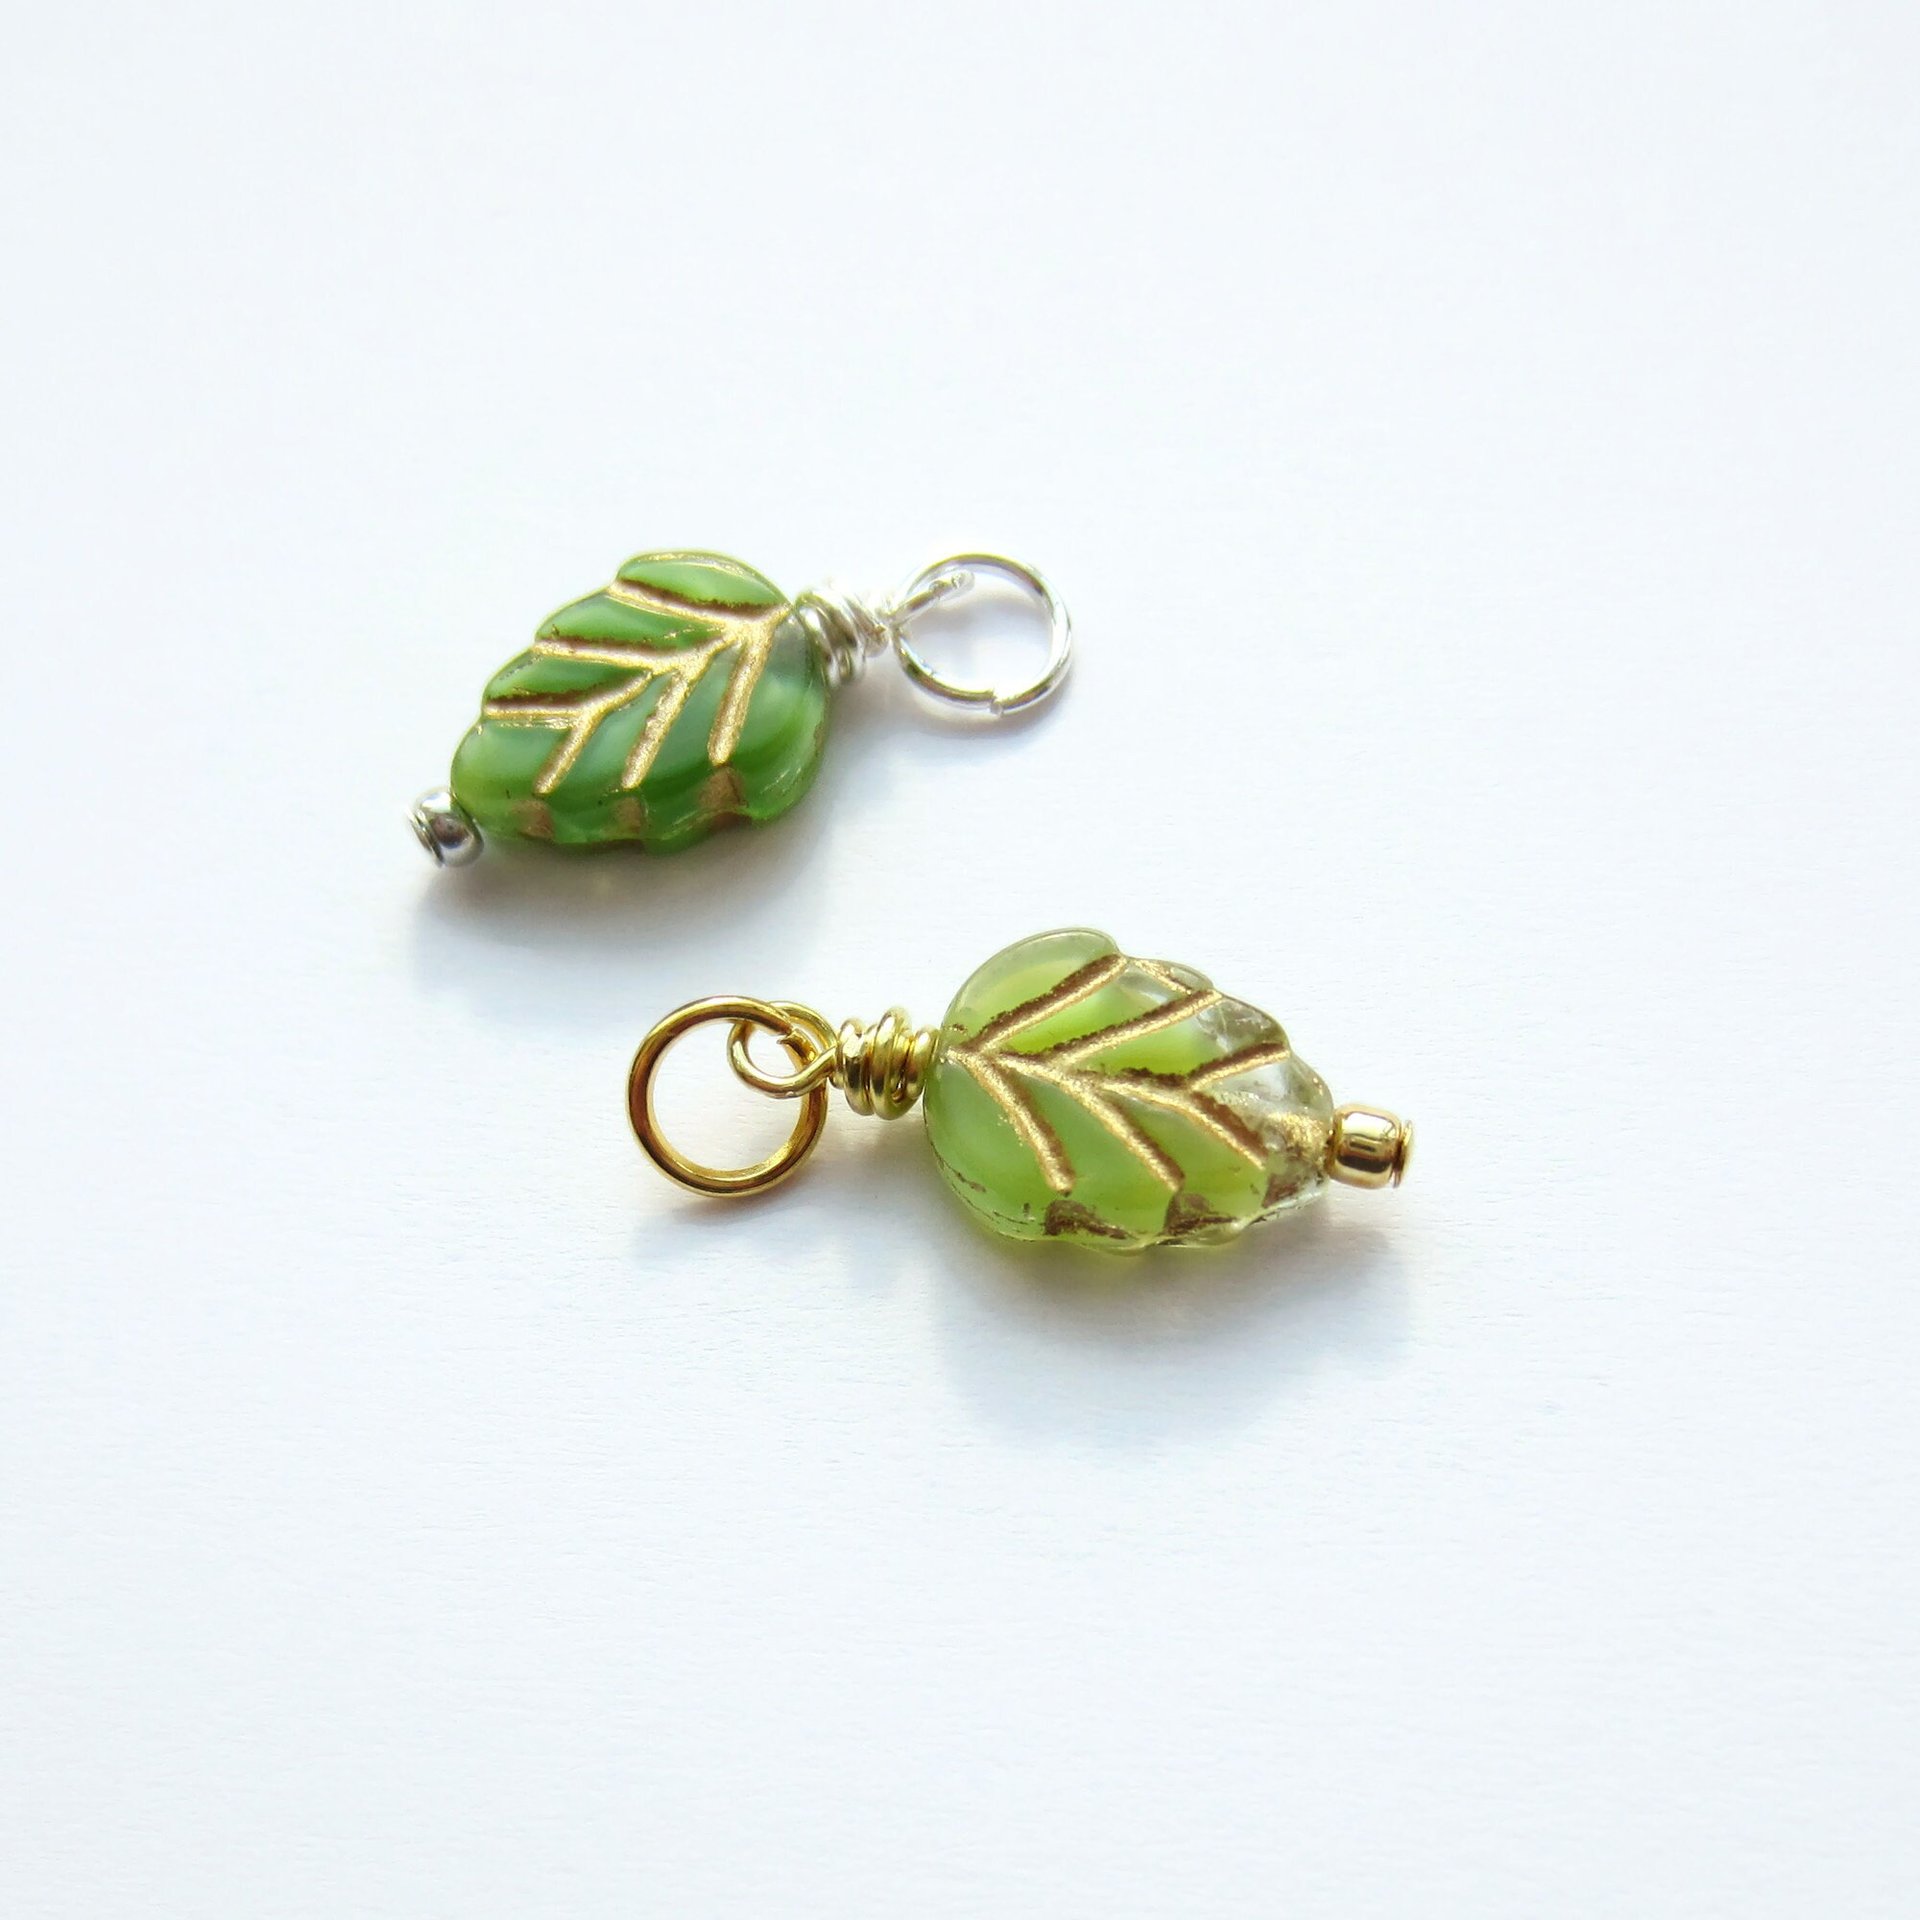 Green and Gold Czech Glass Leaf Charm ~ Handmade by The Tiny Tree Frog Jewellery